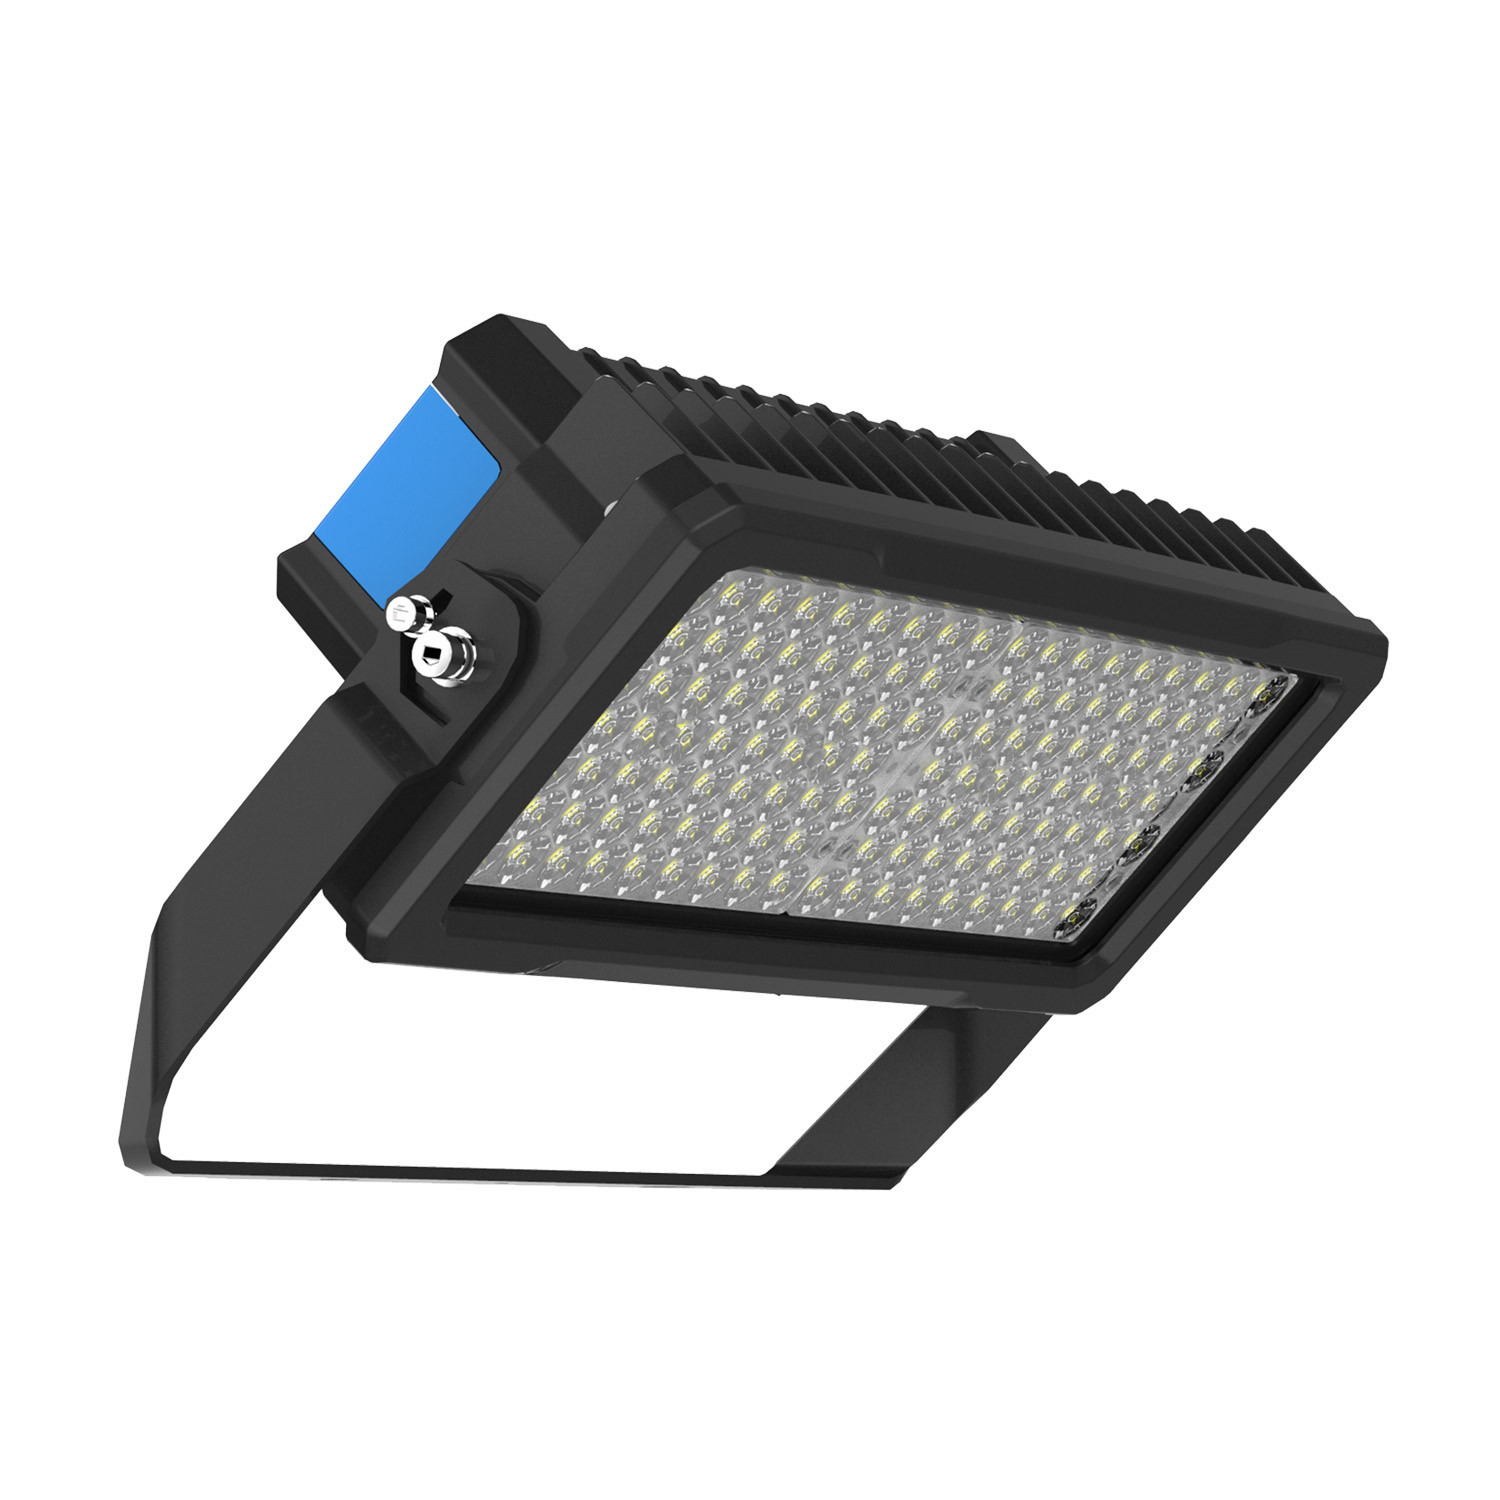 LED spotlight SAMSUNG 250W DRIVER MEAN WELL